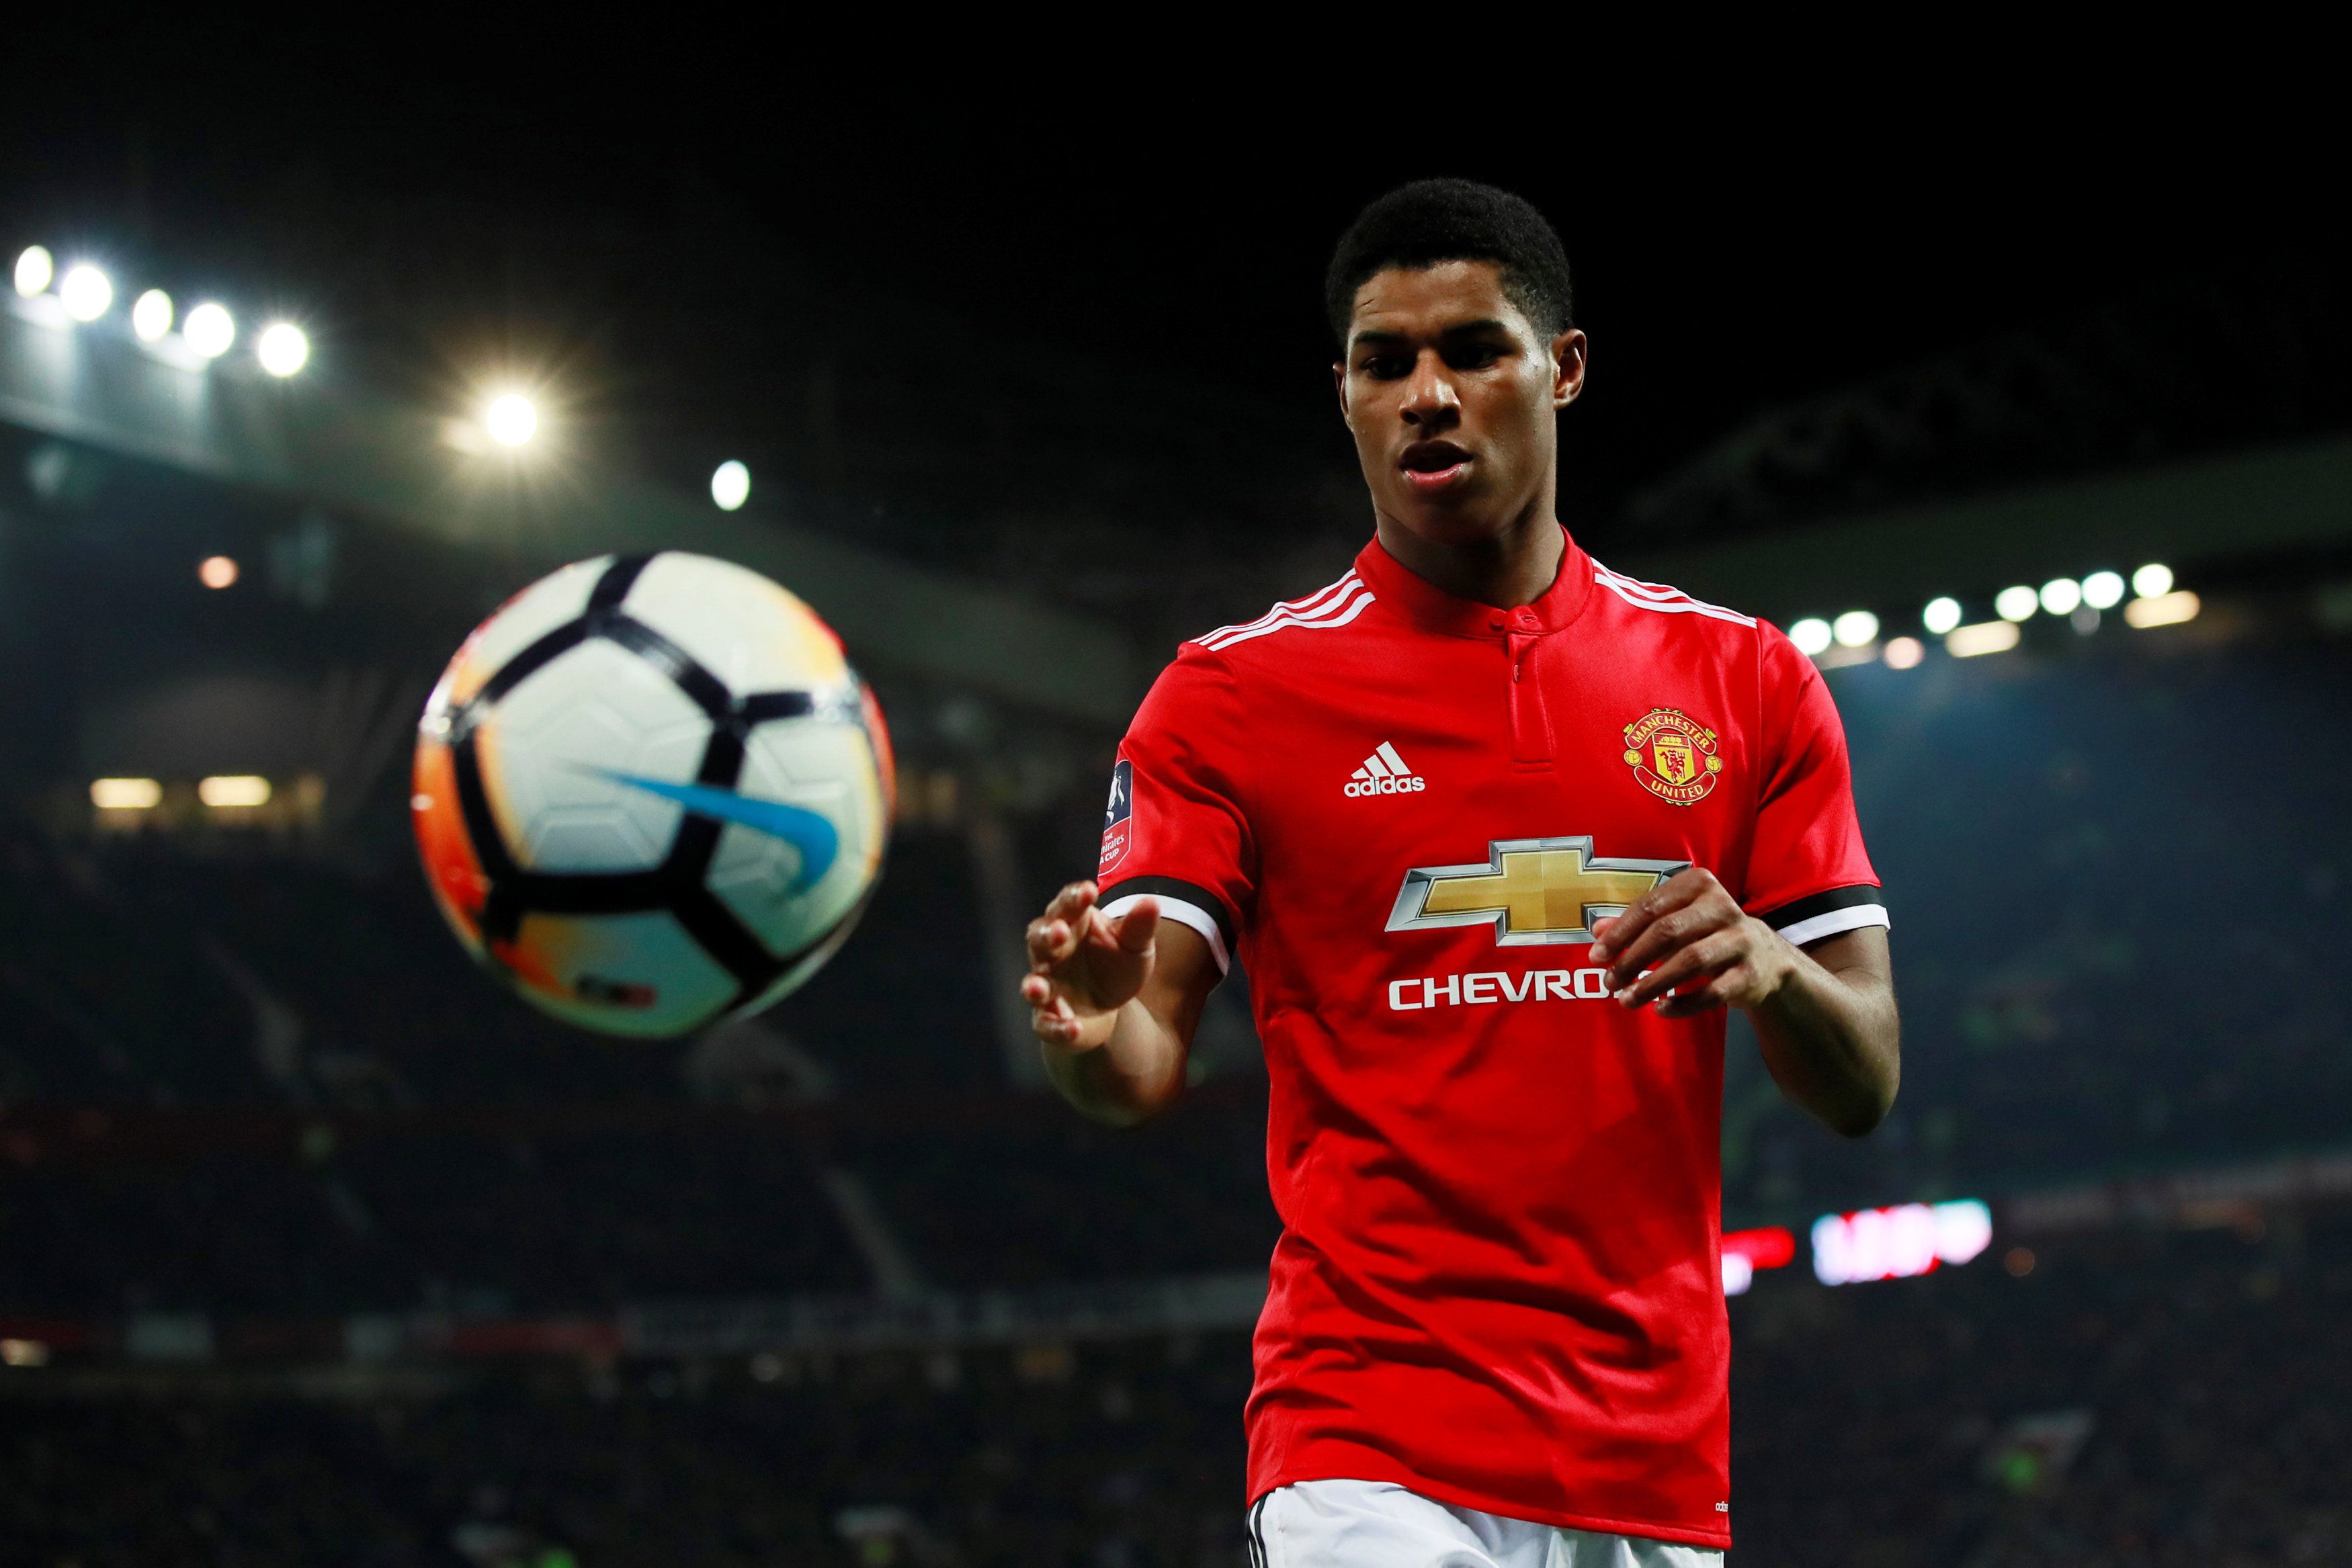 Does Alexis Sanchez's Manchester United arrival threaten Marcus Rashford's World Cup hopes?